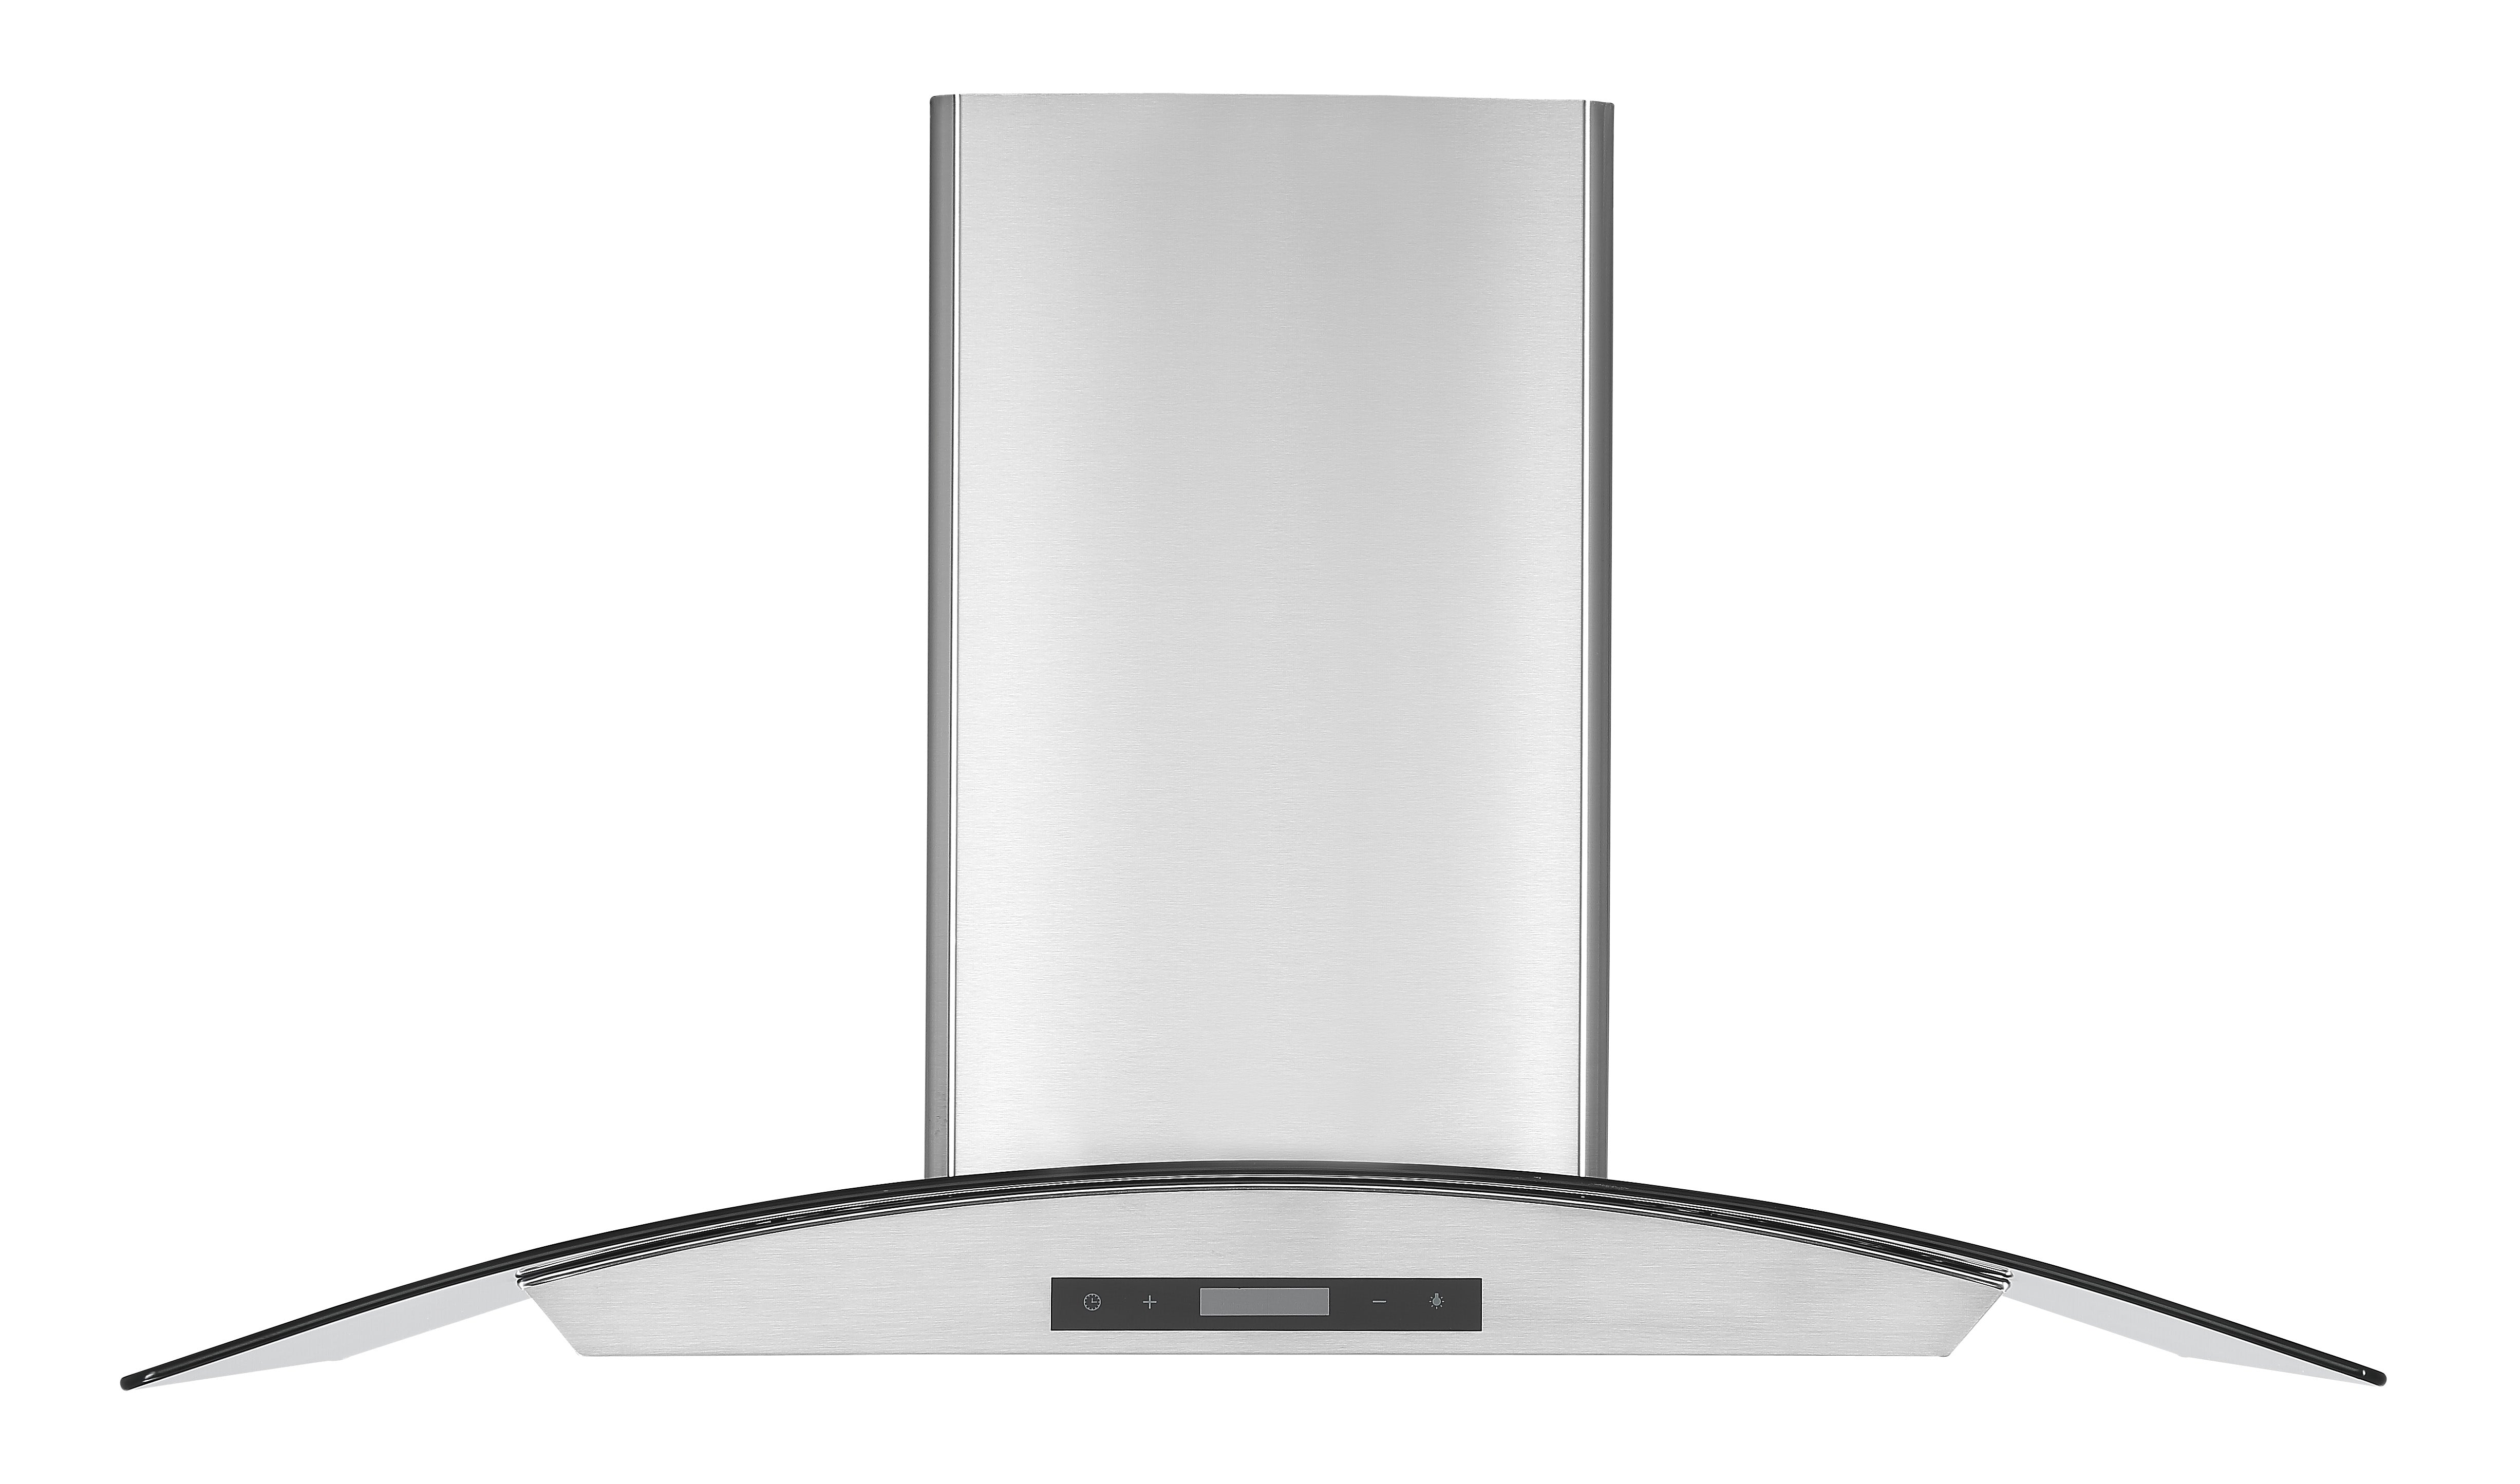 GCB636 36 in. Glass Canopy Range Hood in Stainless Steel